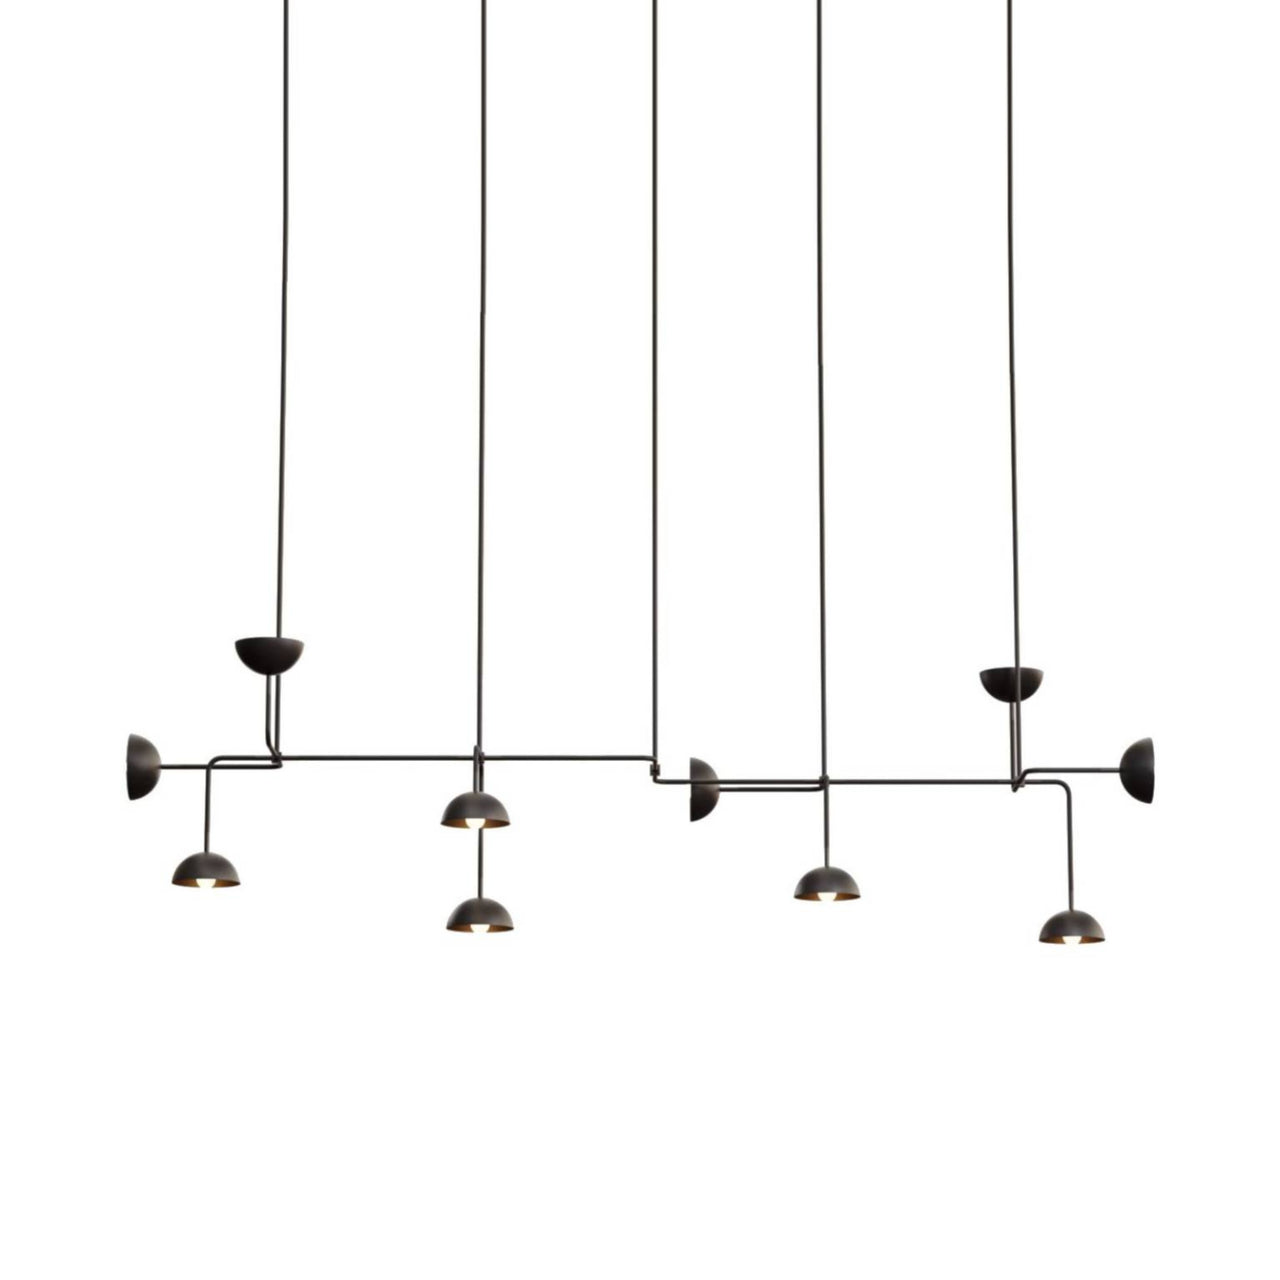 Beaubien Suspension 10 Lamp with Domes: Graphite